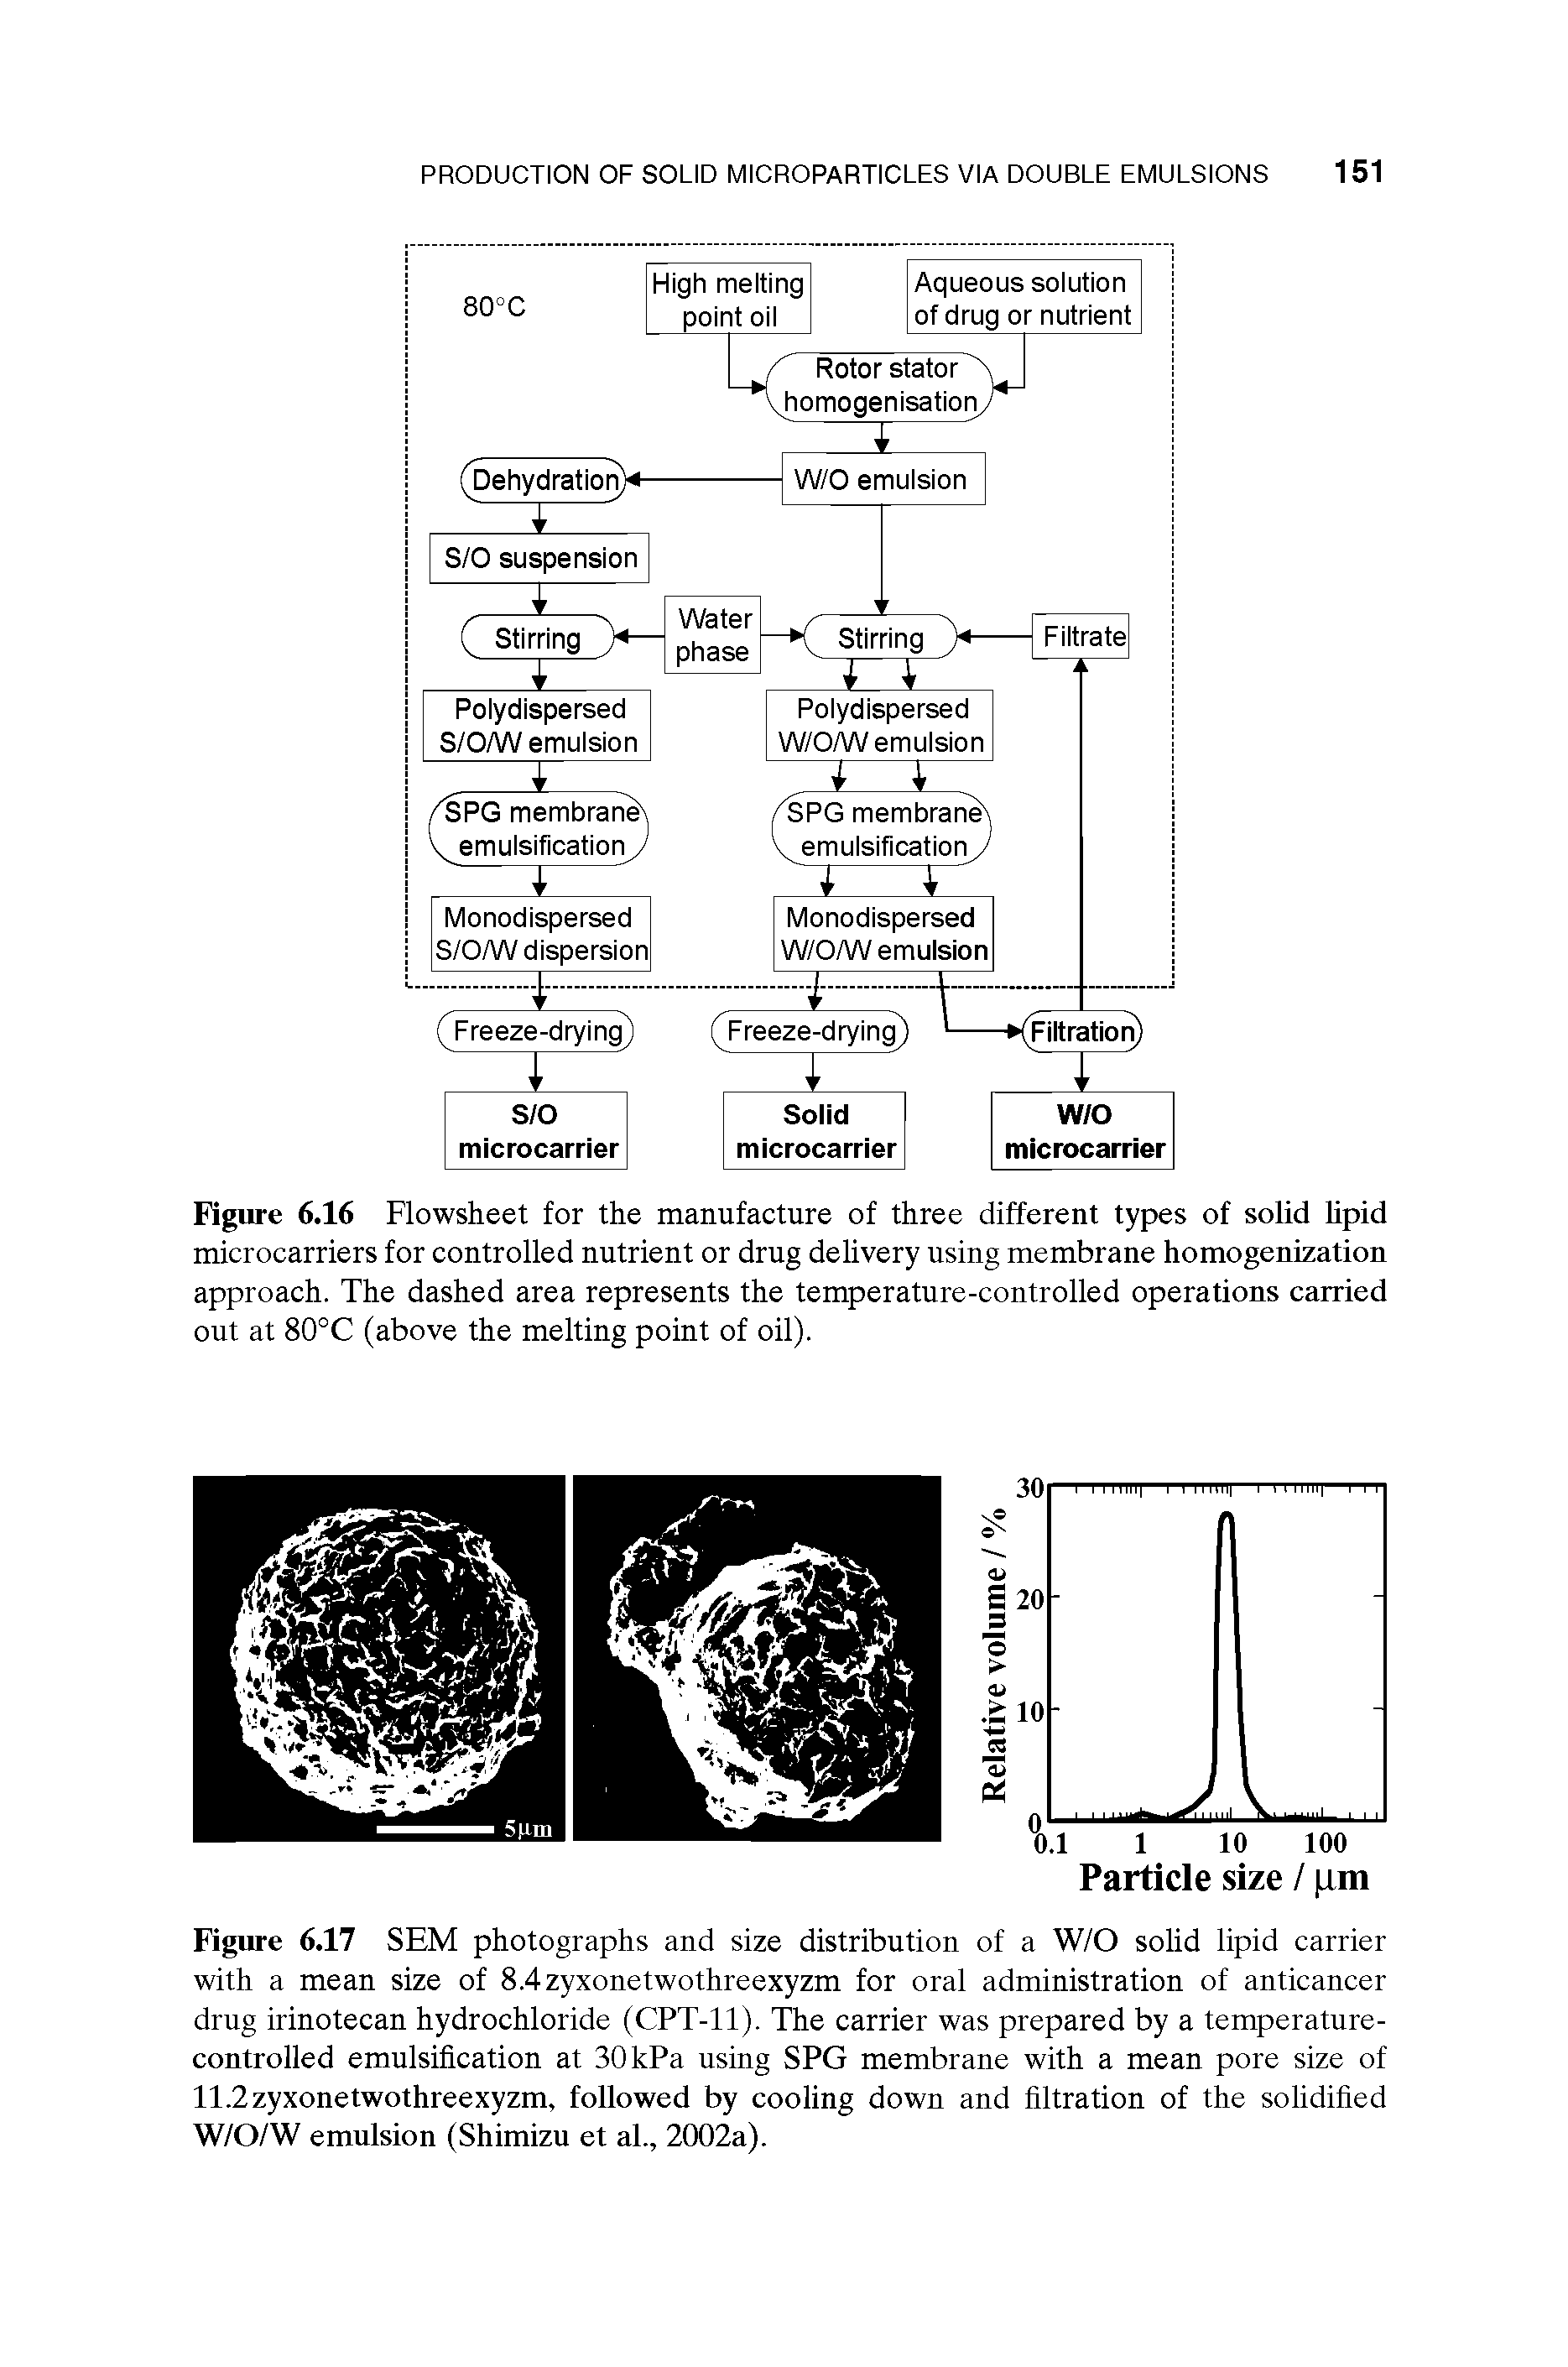 Figure 6.16 Flowsheet for the manufacture of three different types of solid lipid microcarriers for controlled nutrient or drug delivery using membrane homogenization approach. The dashed area represents the temperatnre-controlled operations carried out at 80°C (above the melting point of oil).